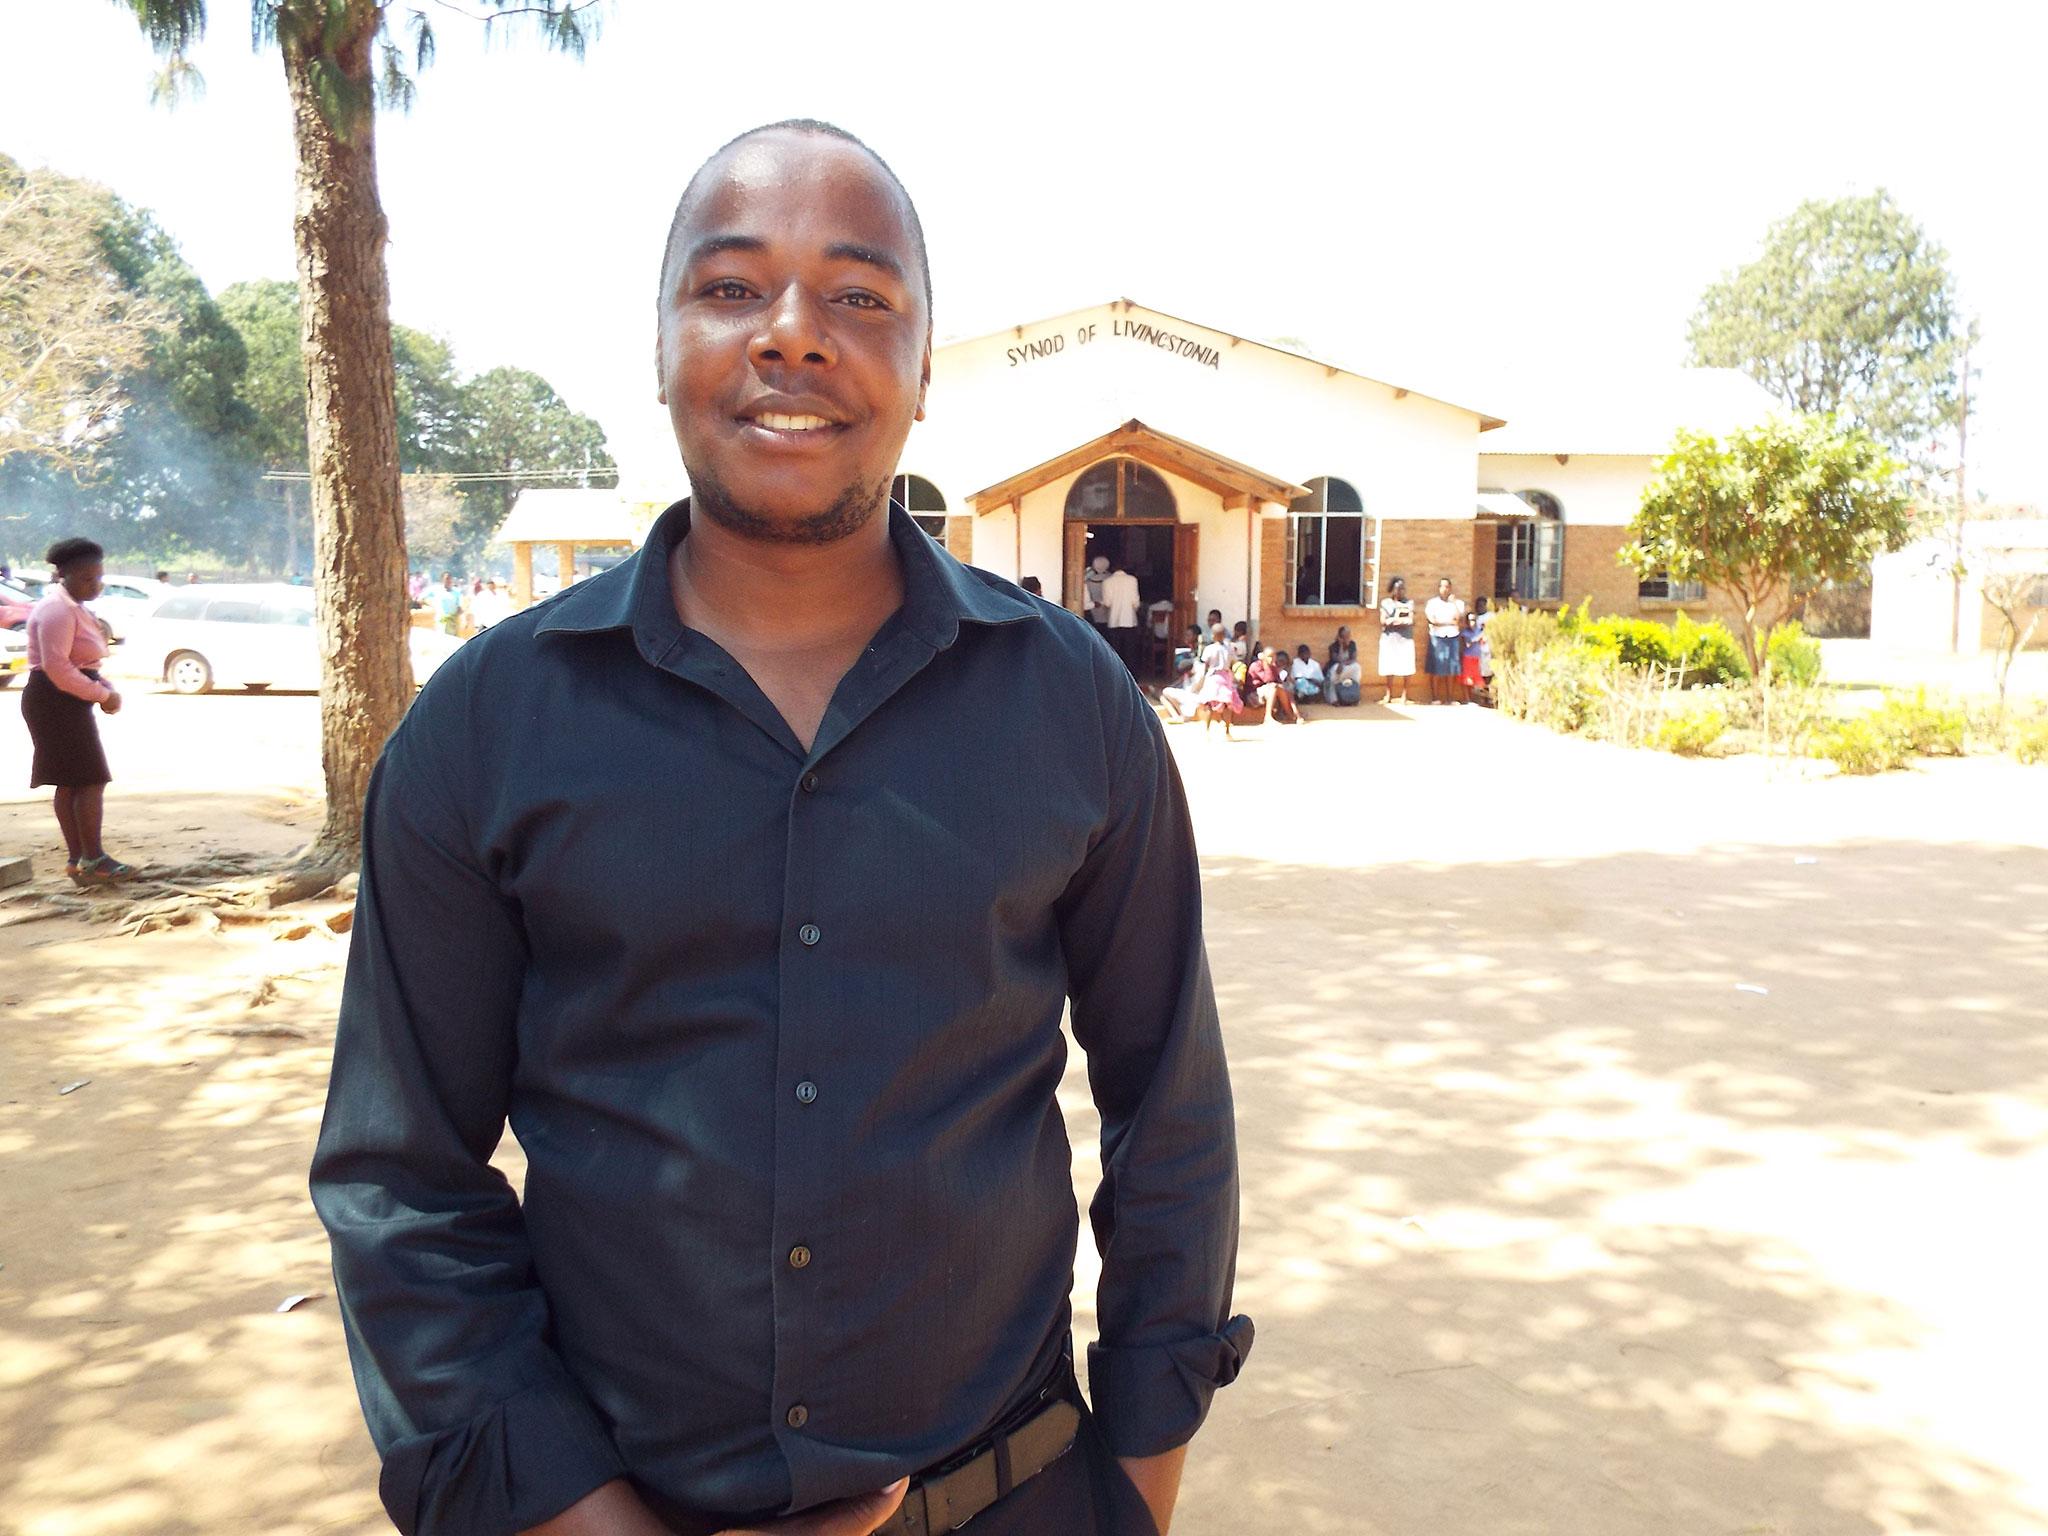 Chatonda, standing outside his church in Mzuzu, Malawi, has tried to run workshops with NGOs